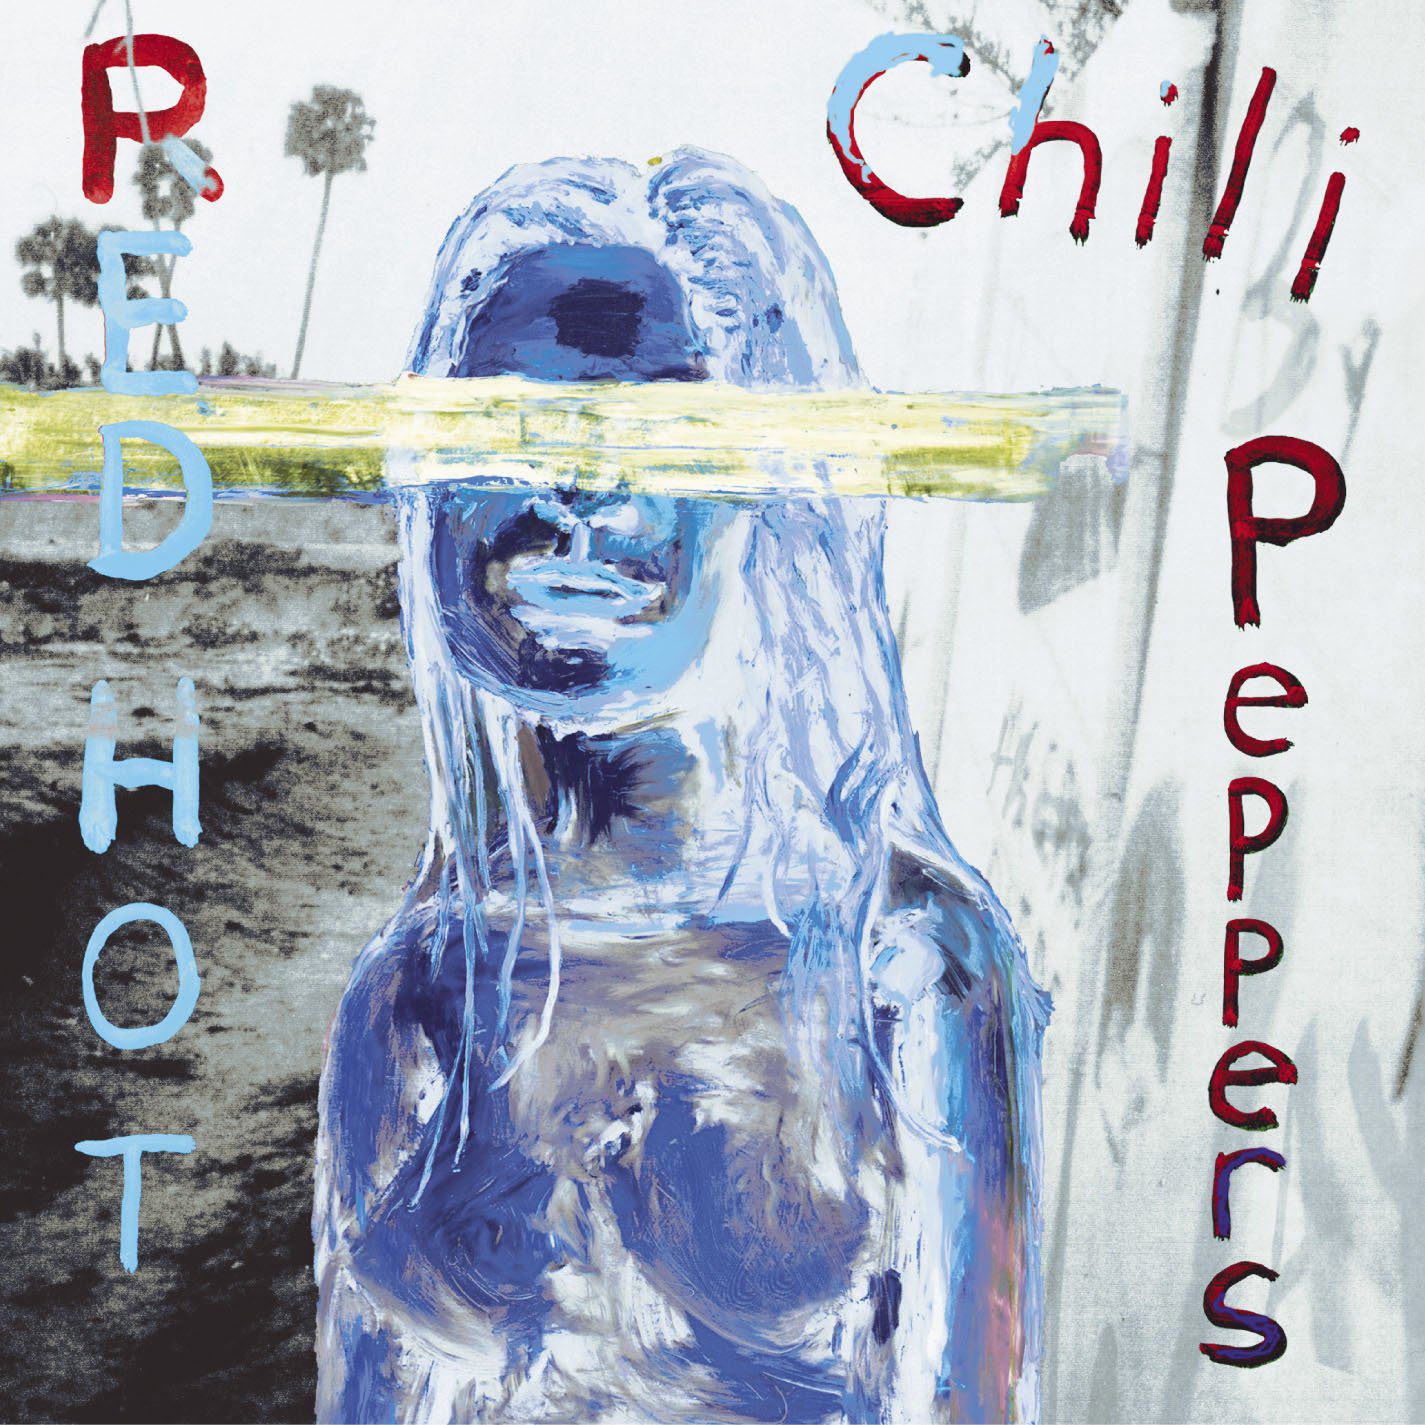 Canciones Traducidas: Can’t Stop – Red Hot Chili Peppers